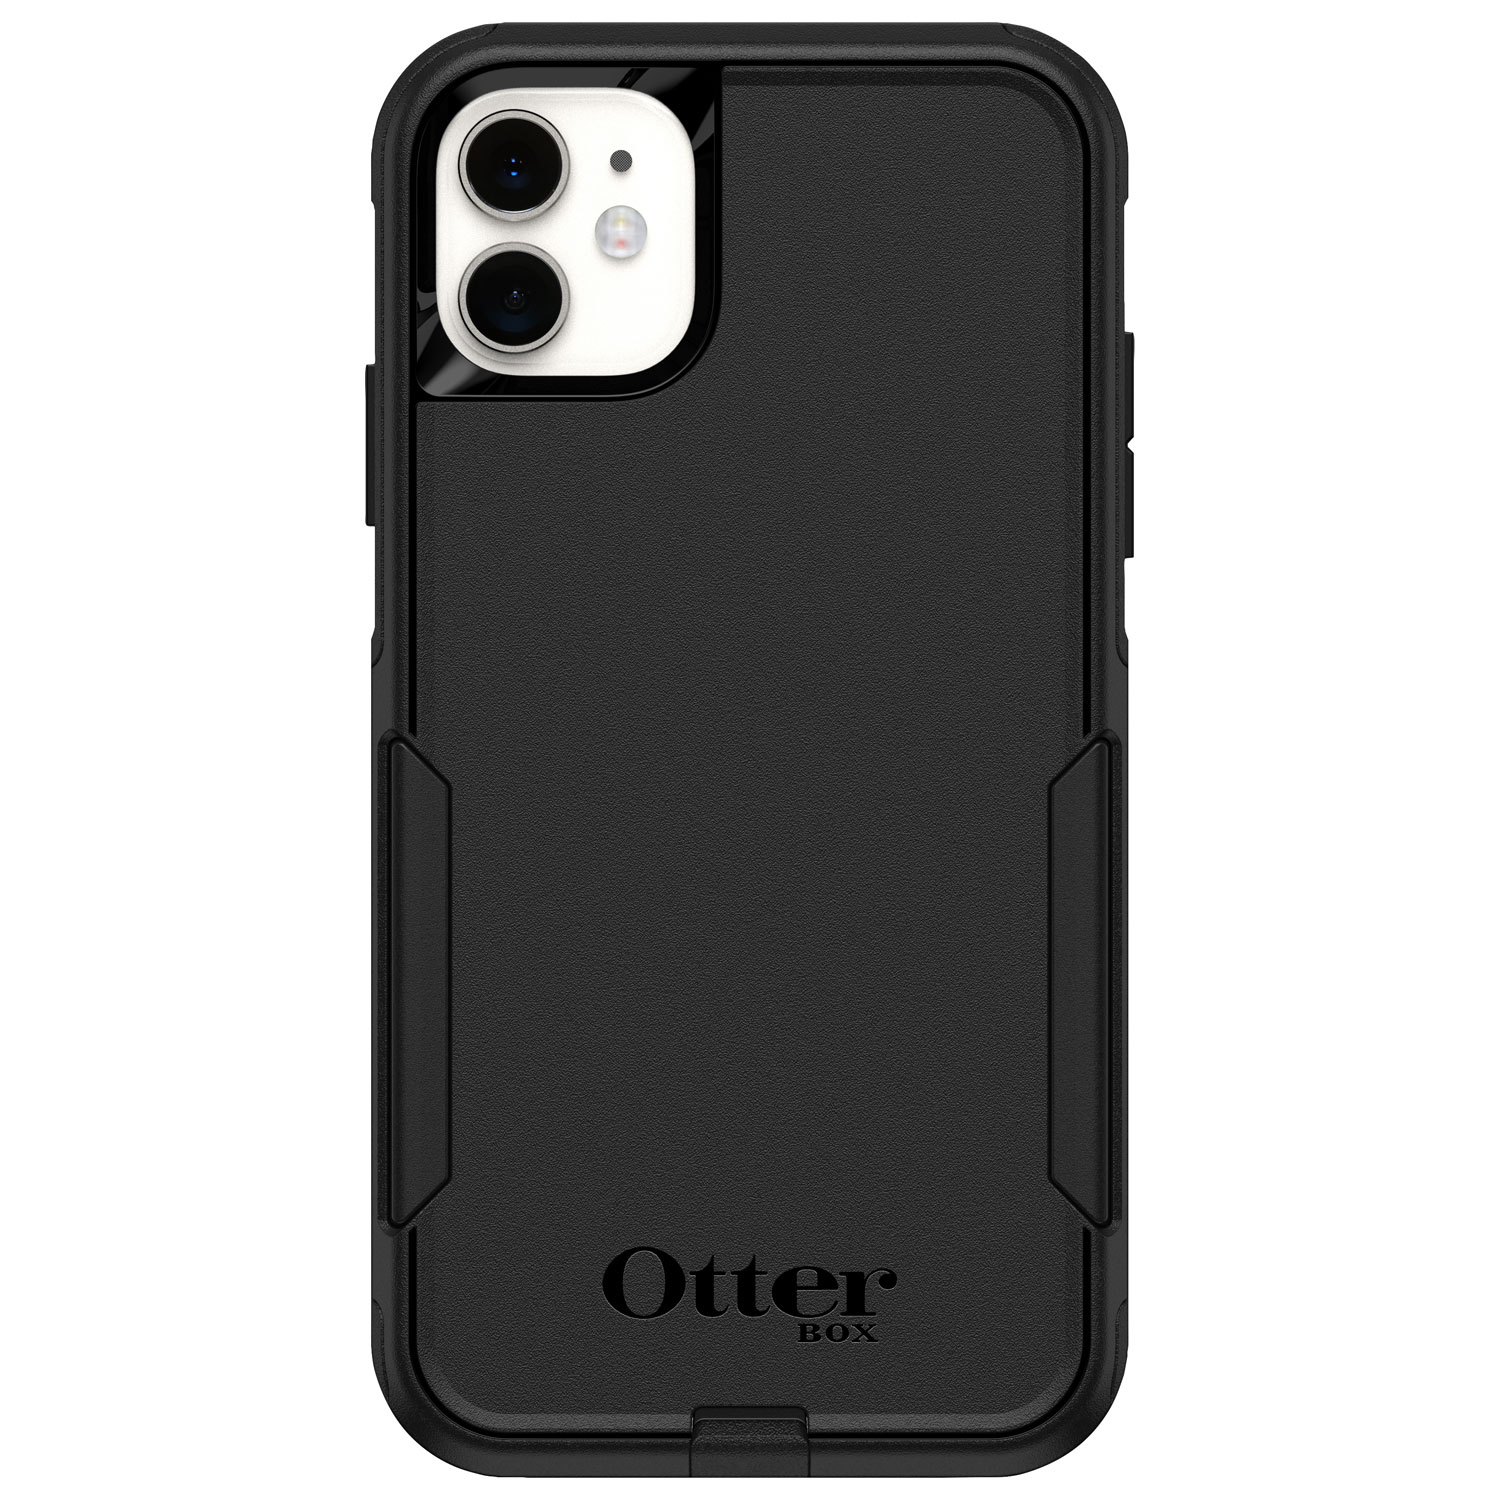 OtterBox Commuter Fitted Hard Shell Case for iPhone 11/XR - Black